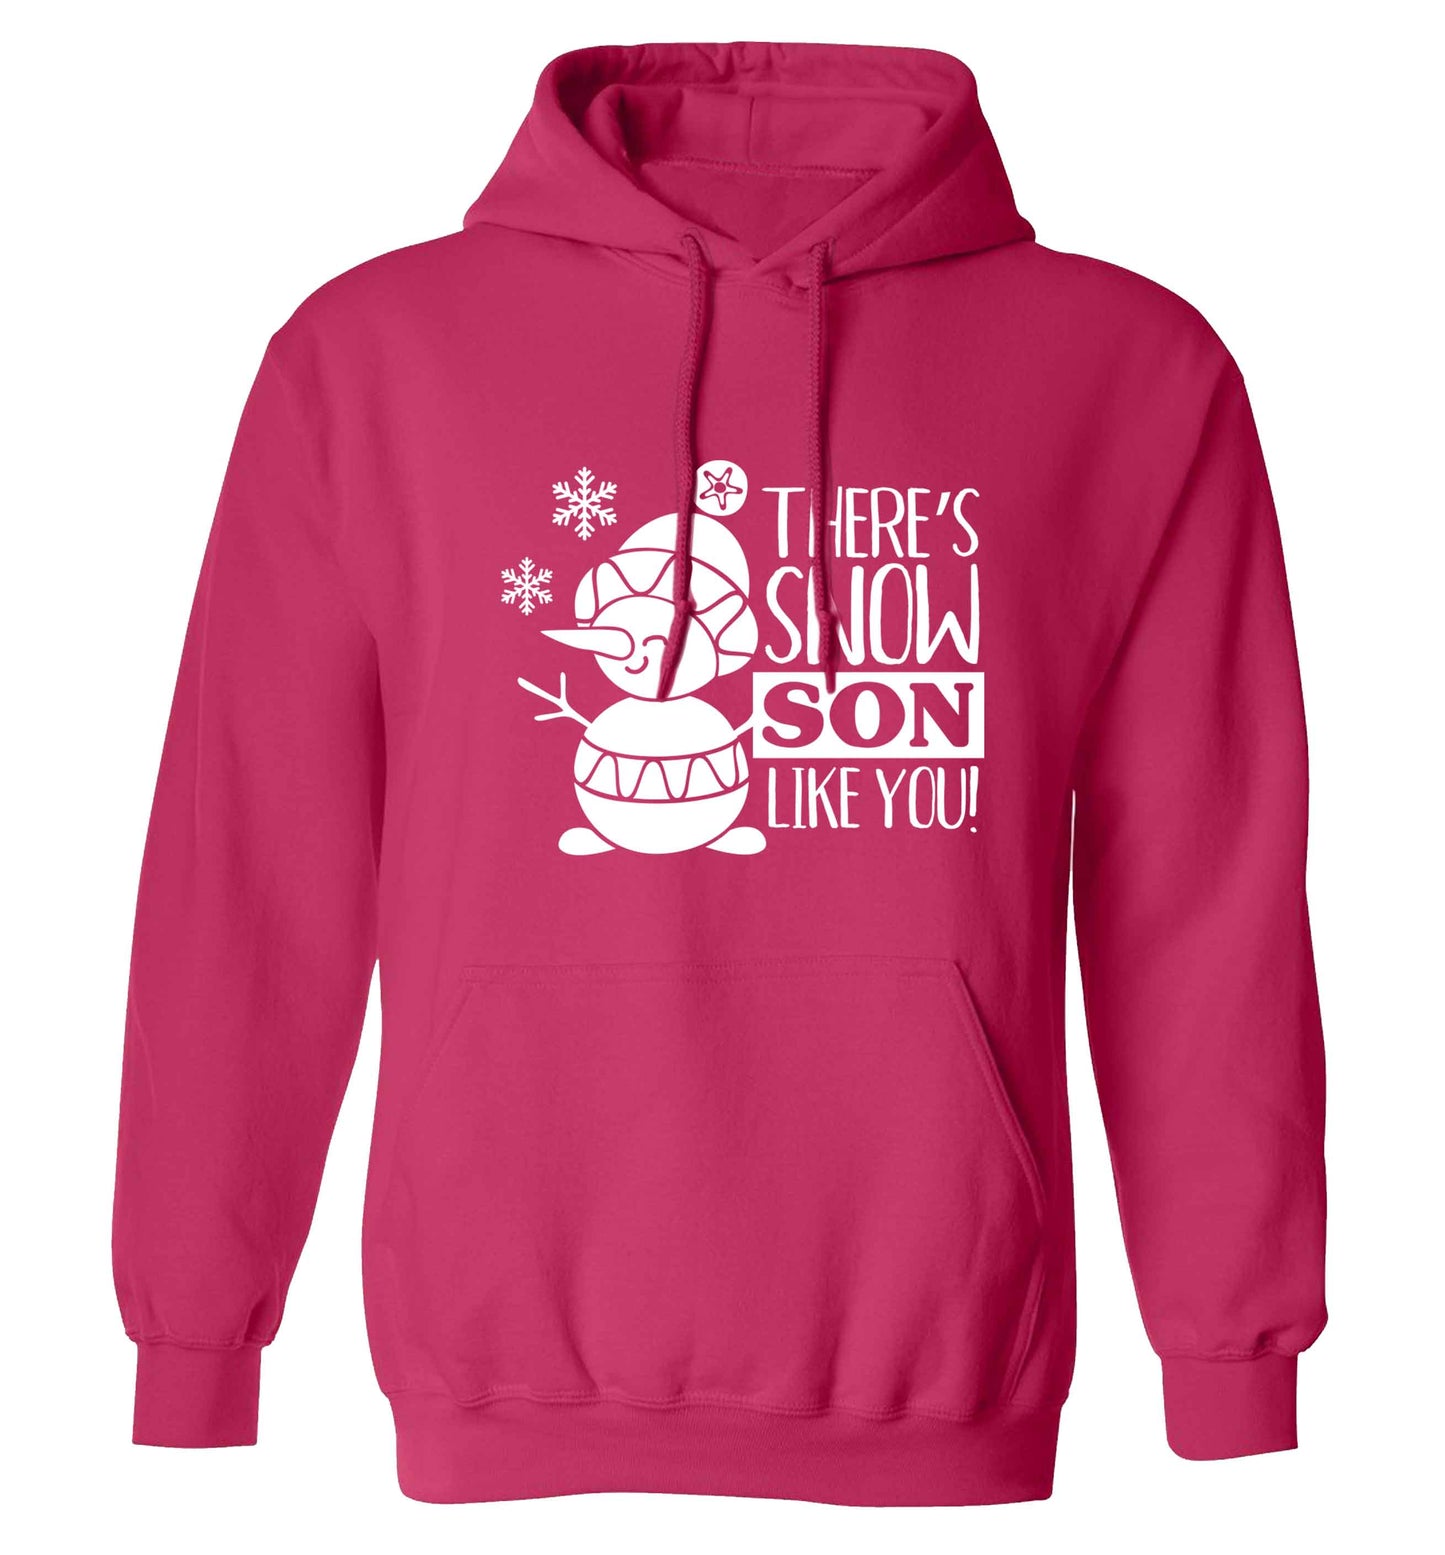 There's snow son like you adults unisex pink hoodie 2XL